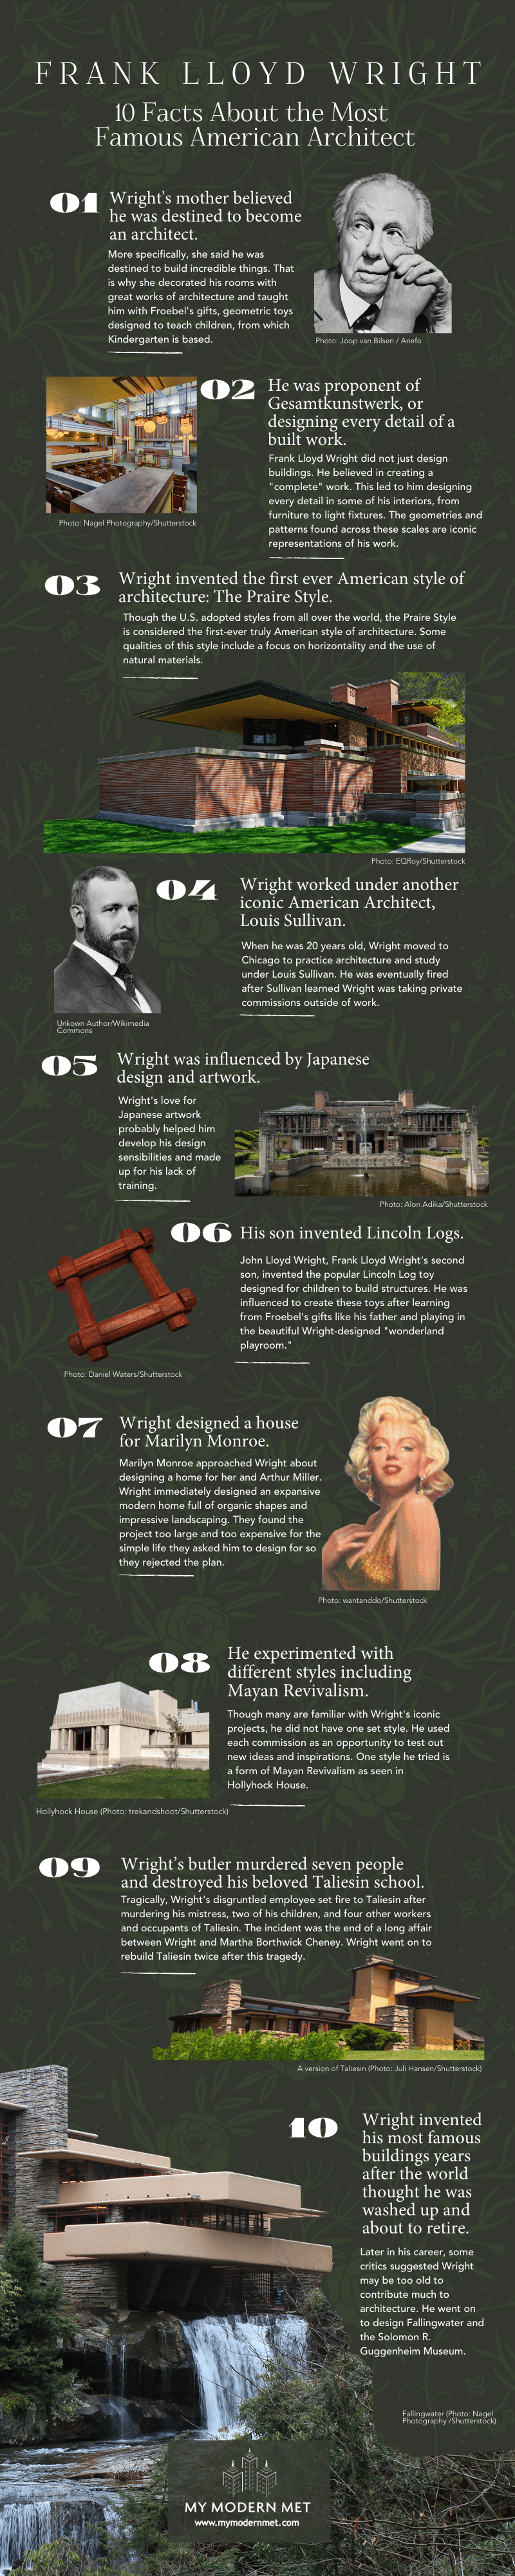 10 Facts About Frank Lloyd Wright the Most Famous American Architect [Infographic]